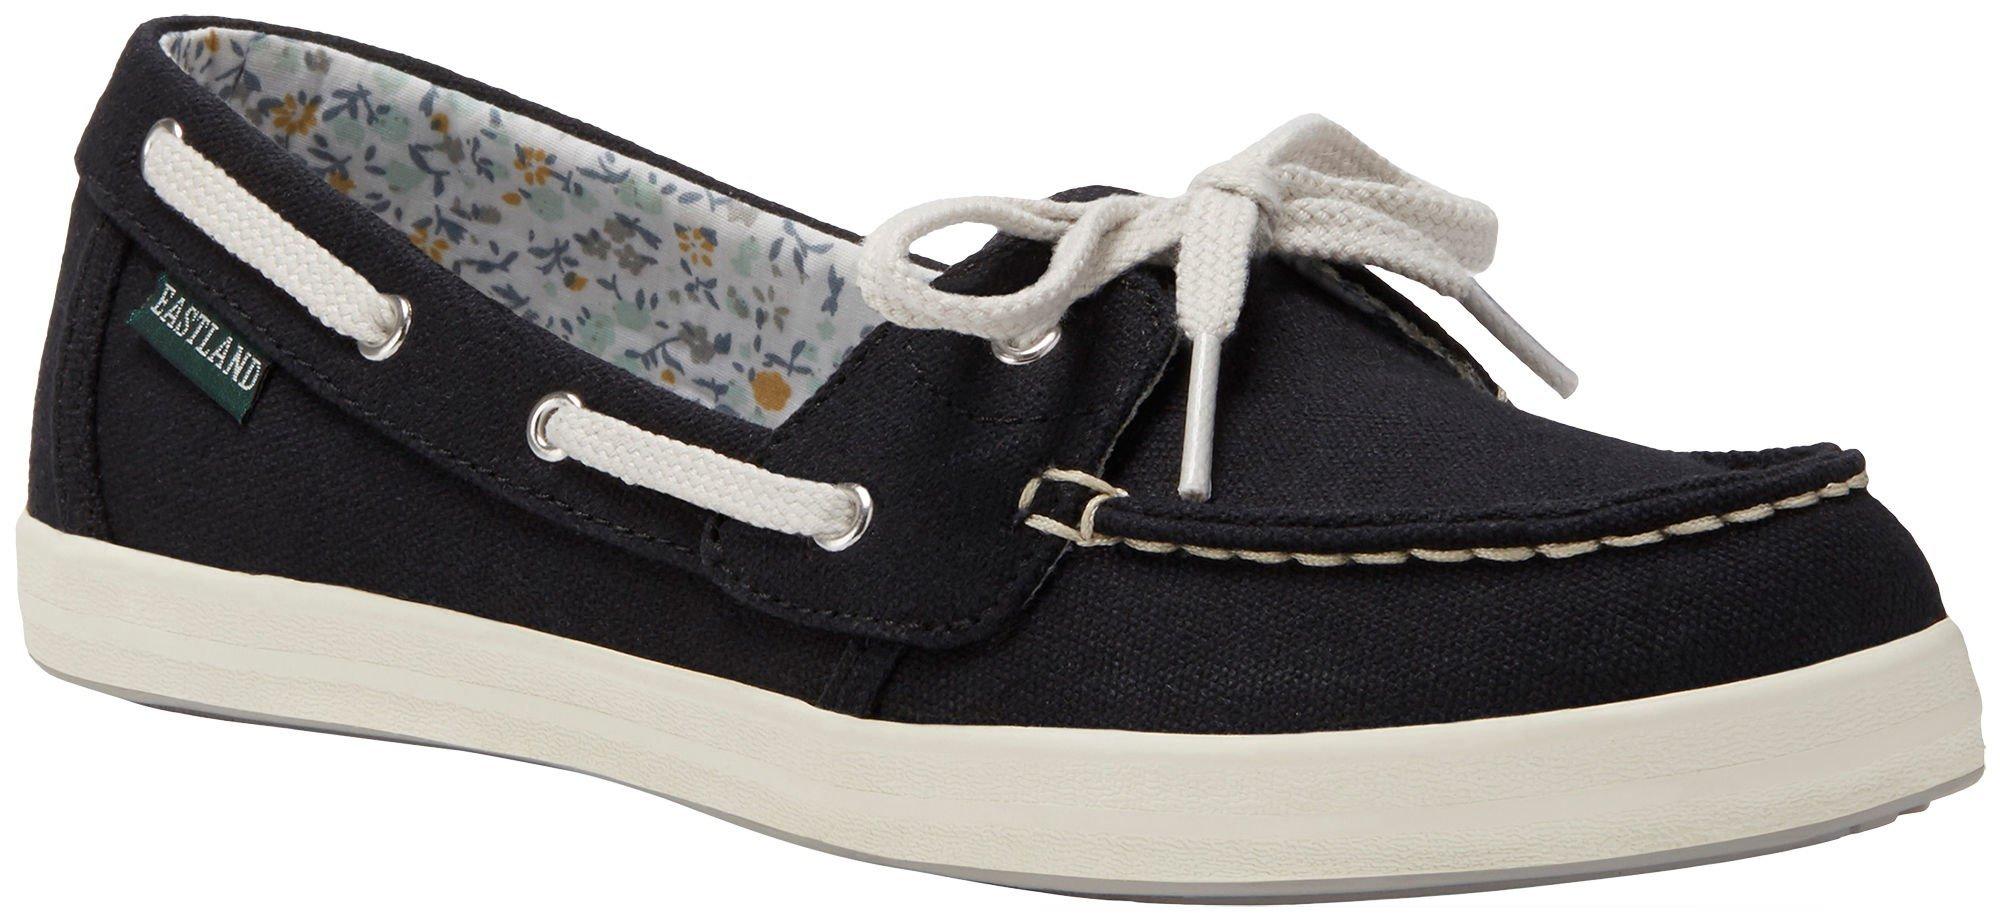 Detroit Tigers Womens Boat Shoes by Eastland | Bealls Florida